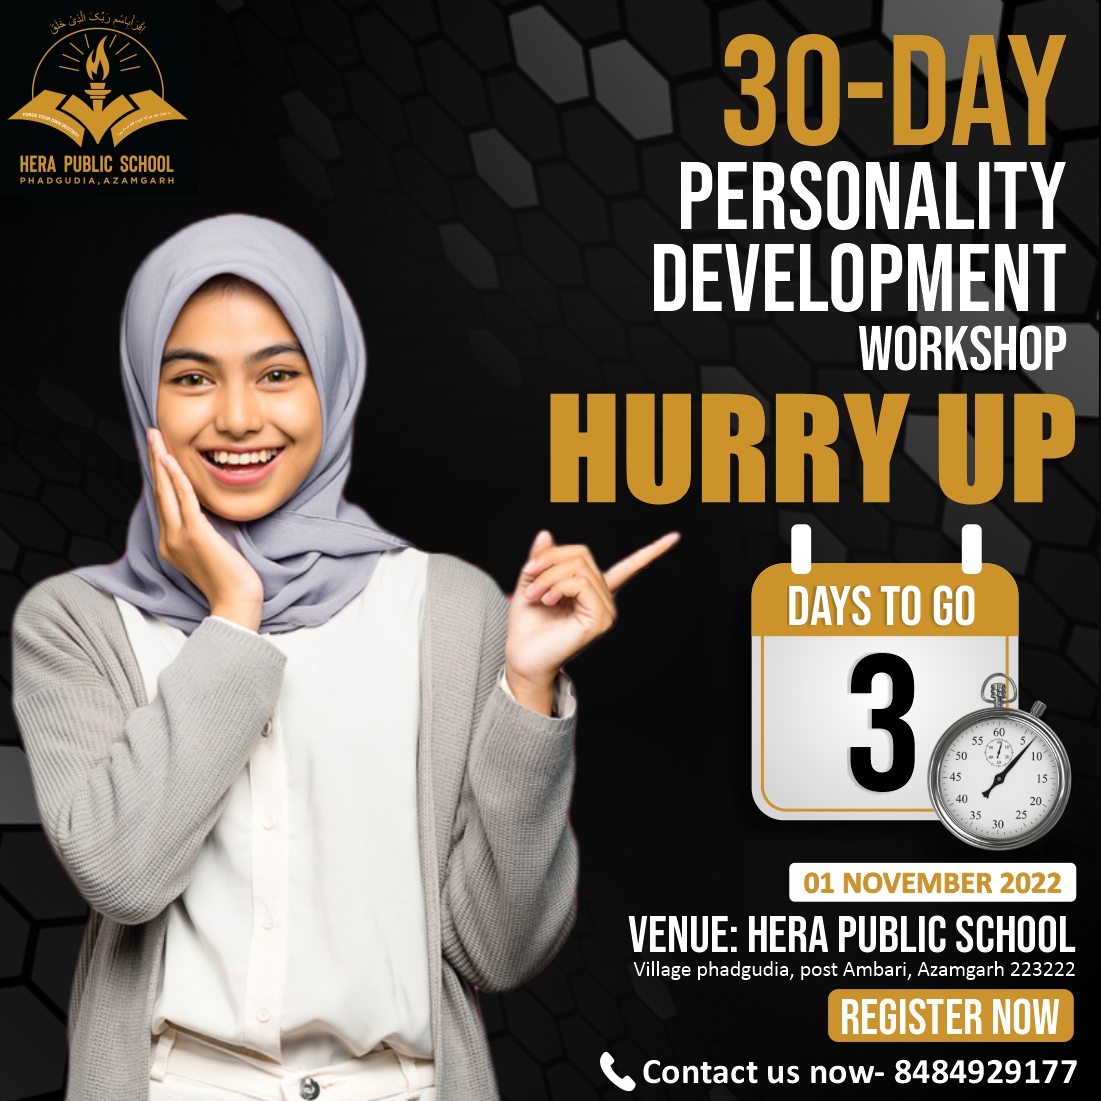 3 Days To Go! Hurry Up... Register Now!

30-Day Personality Development Workshop

Contact: 8484929177 for more details⁠

#personalitydevelopementworkshop #spokenenglish #learnenglish #englishlearners #englishlearningtips #englishspeaking #englishvocabulary #successtips